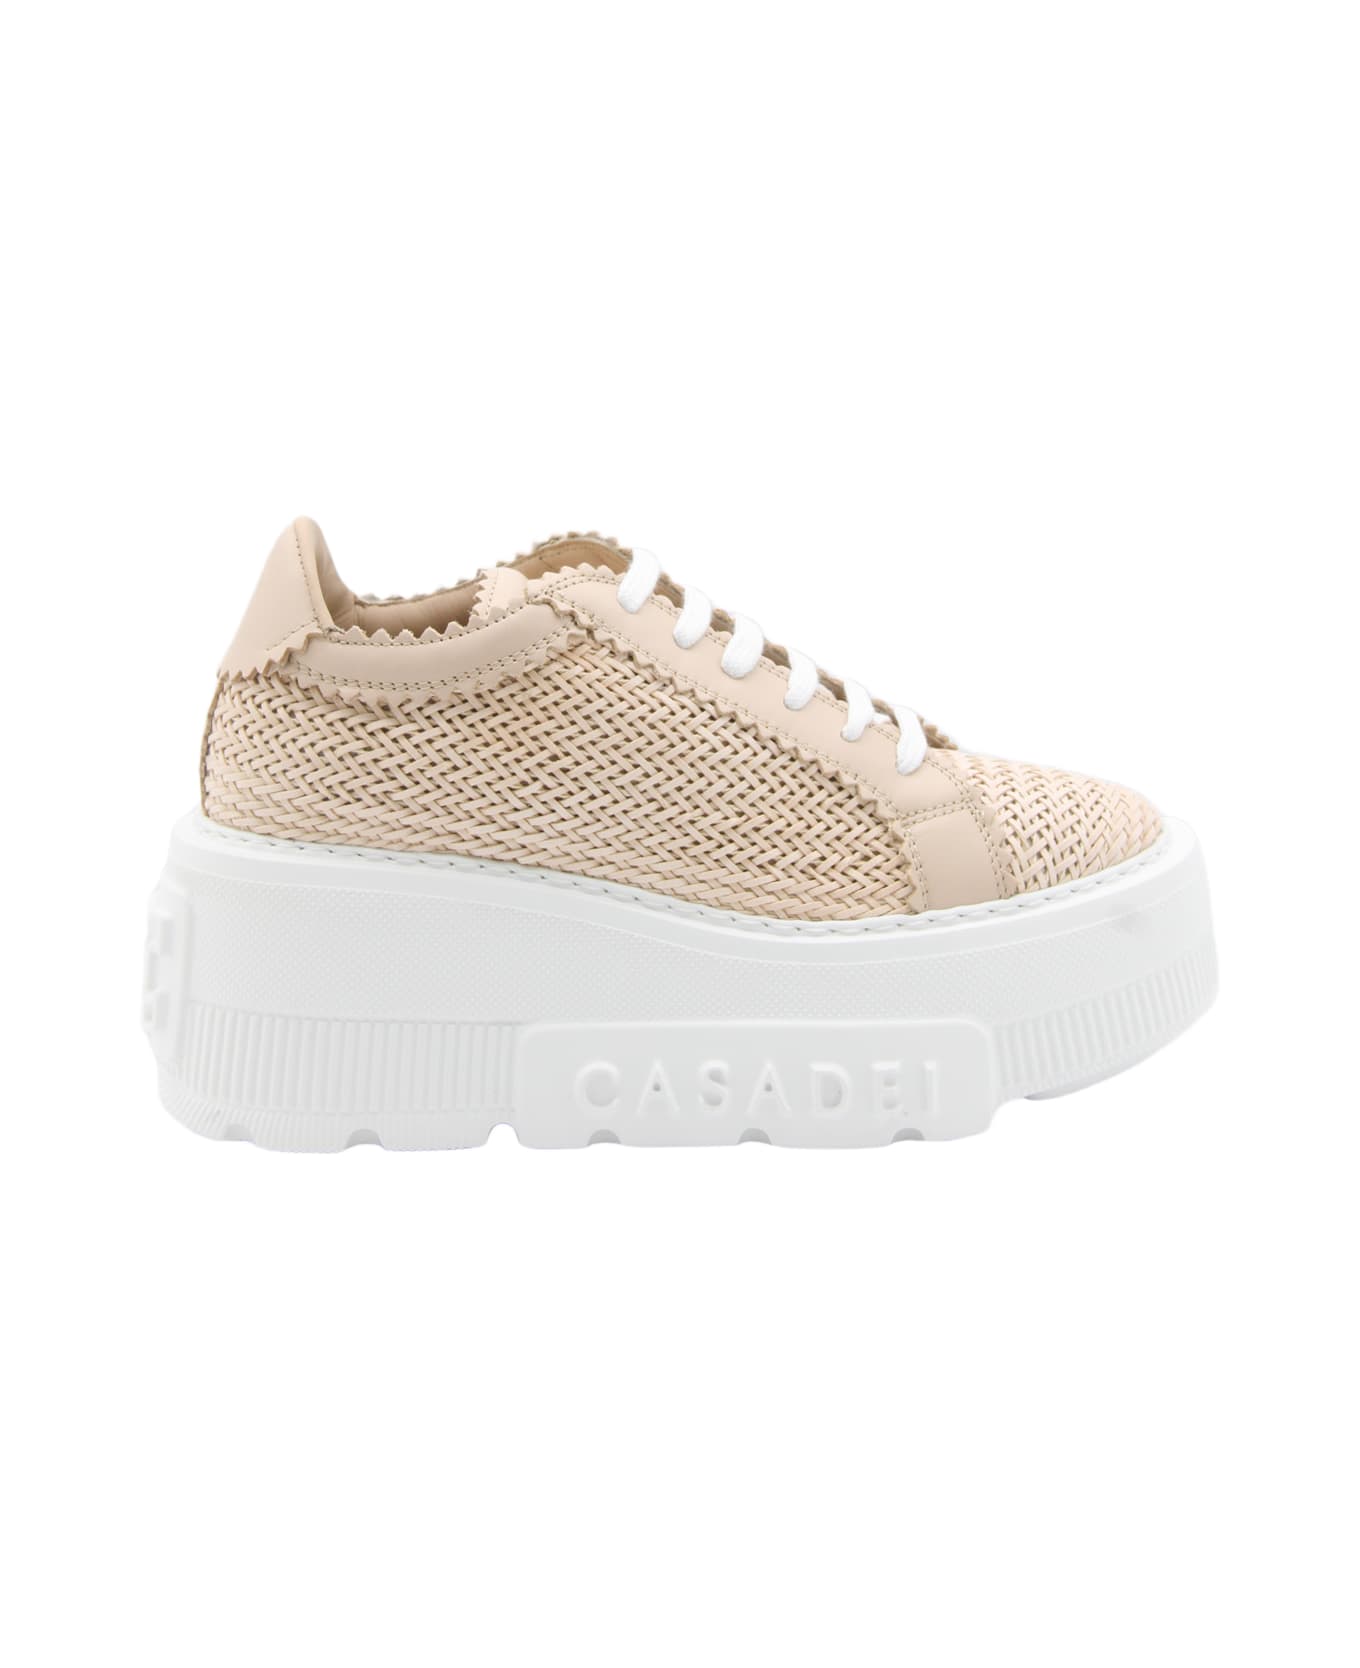 Casadei Light Pink And White Leather Sneakers - SPIAGGIA ROSA ウェッジシューズ